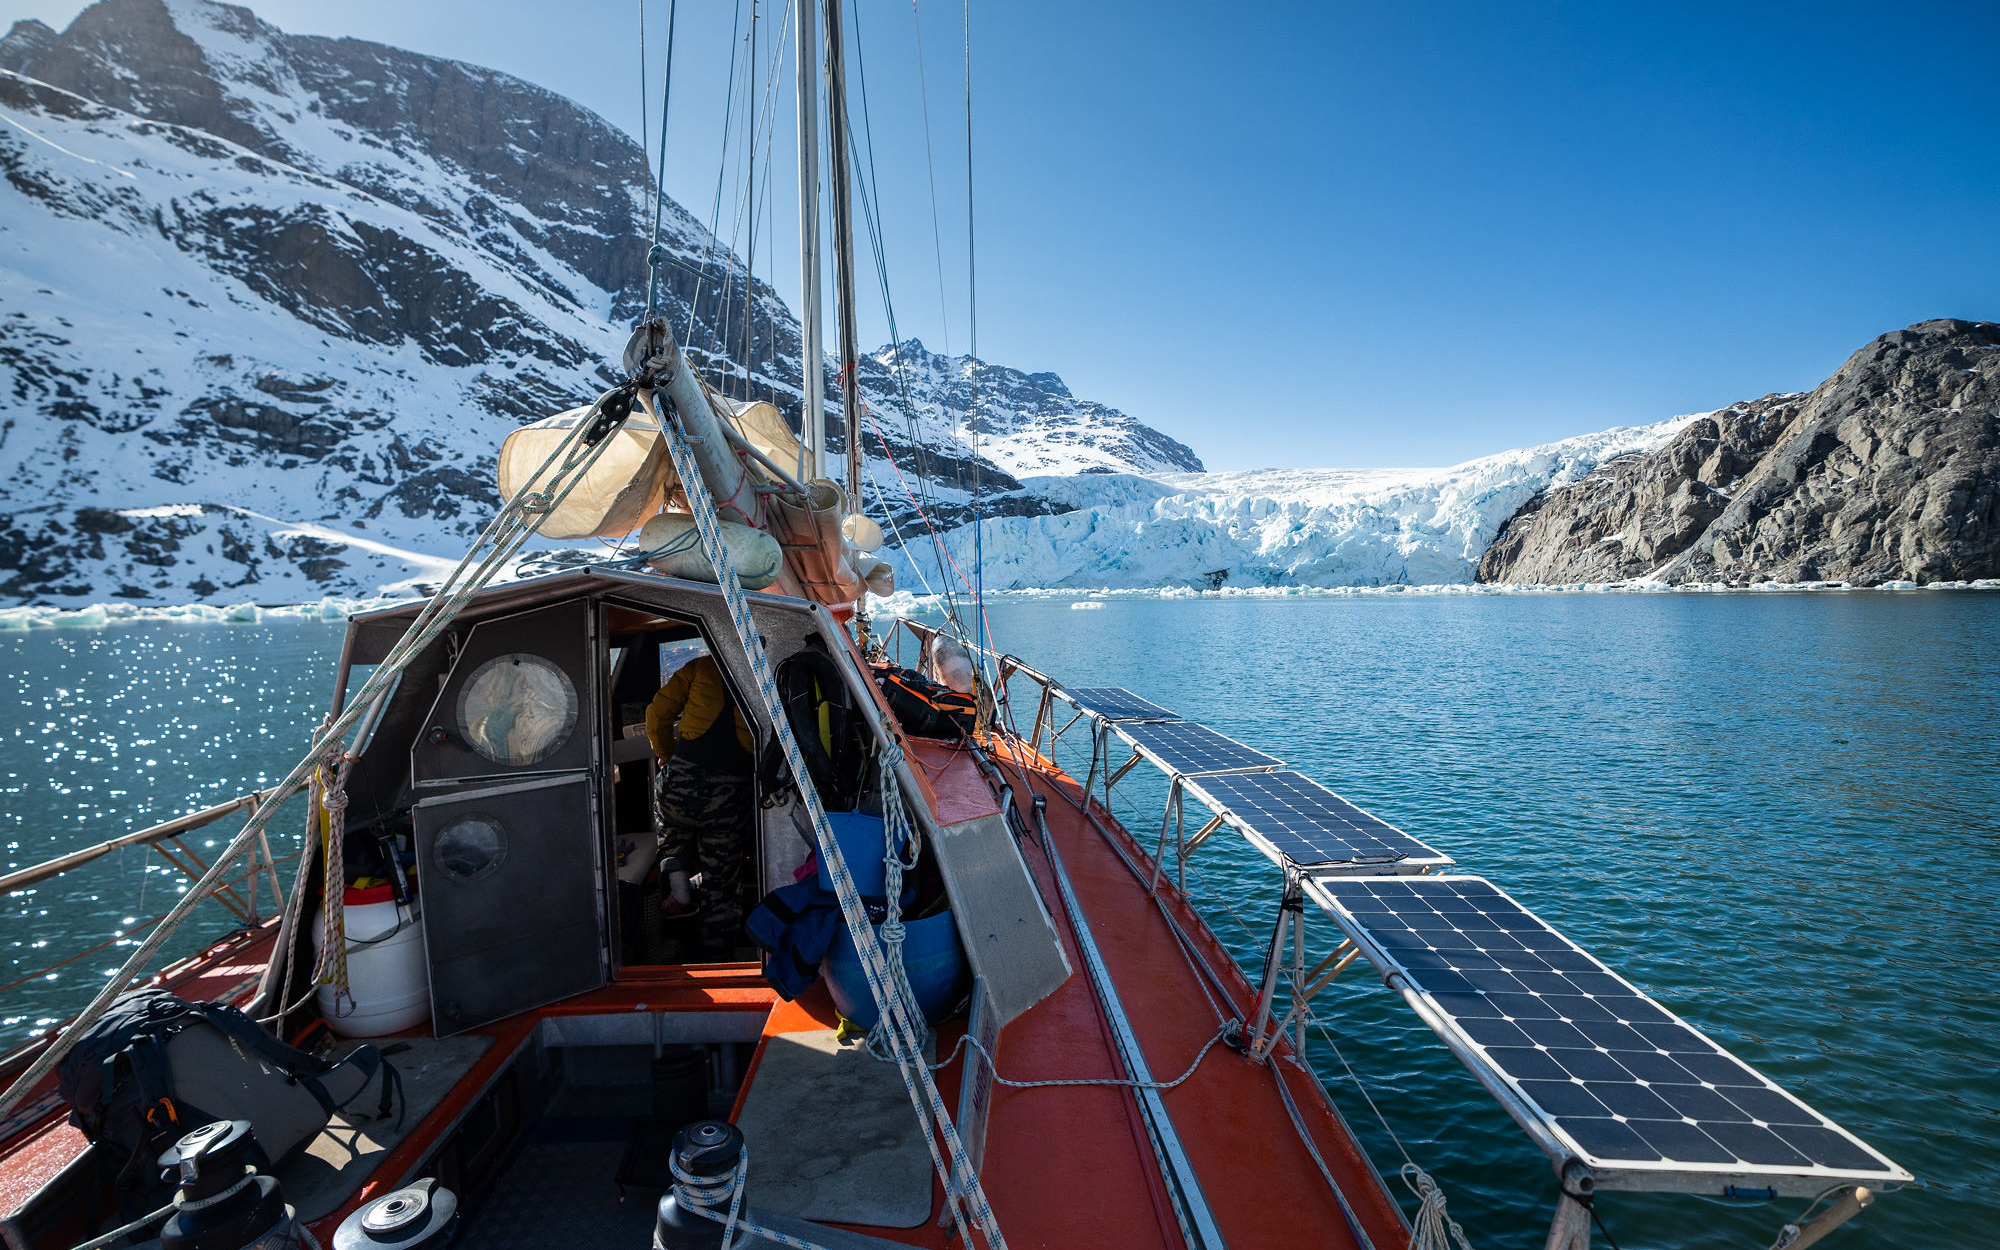 View of the sailboat on the water in Greenland.